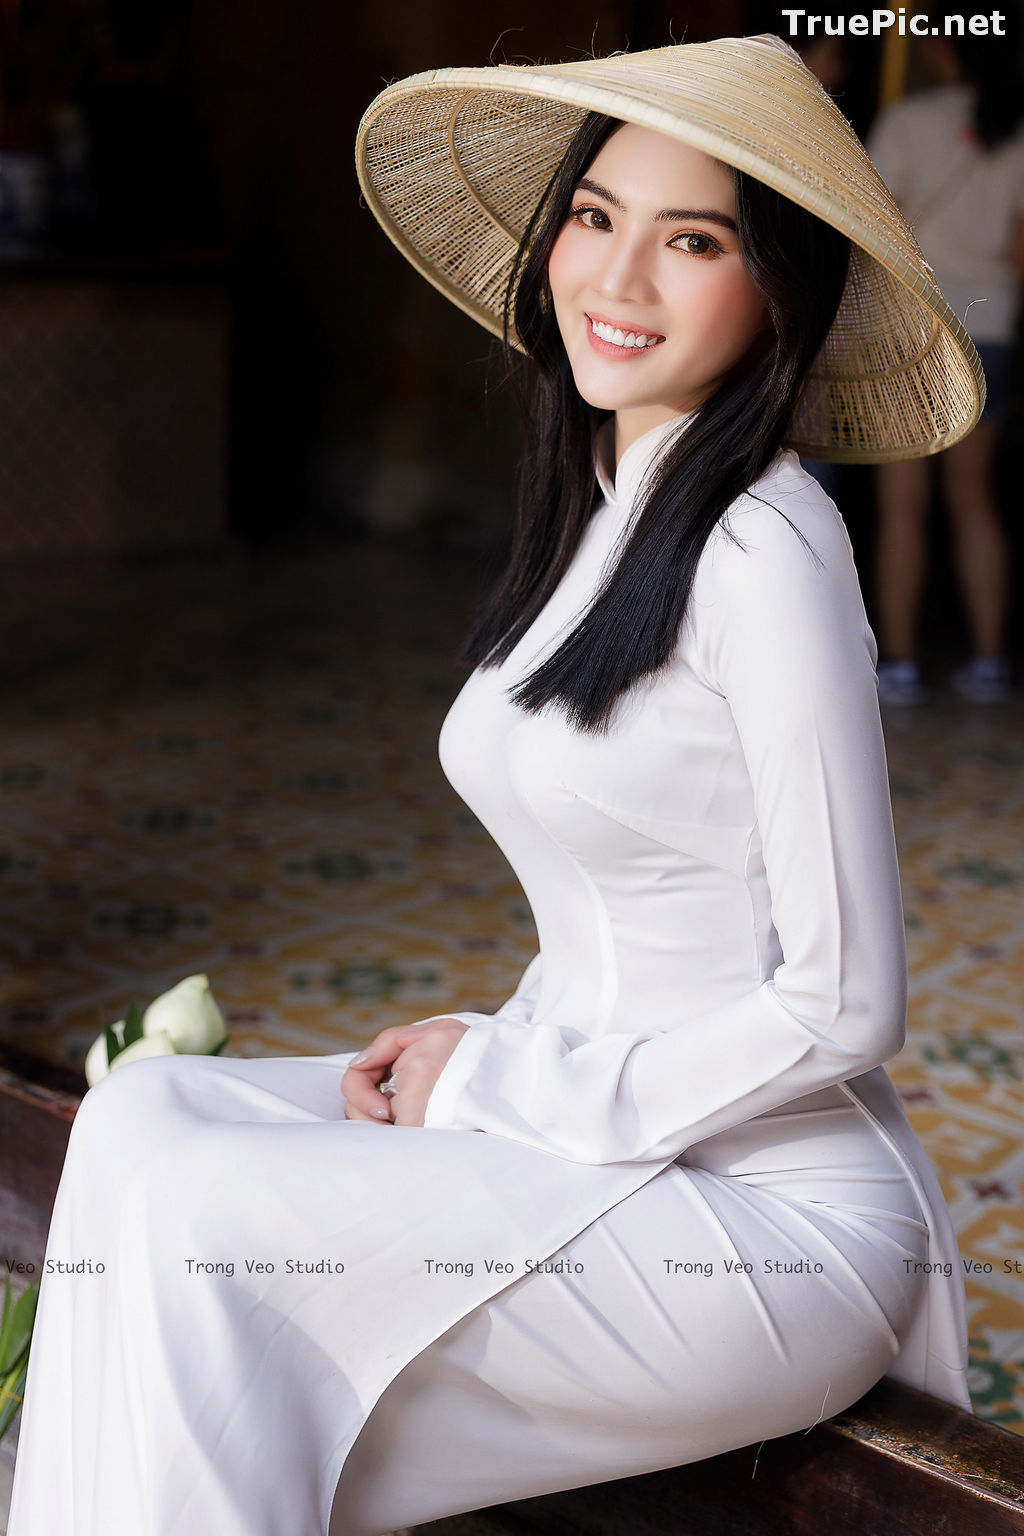 Image The Beauty of Vietnamese Girls with Traditional Dress (Ao Dai) #2 - TruePic.net - Picture-88